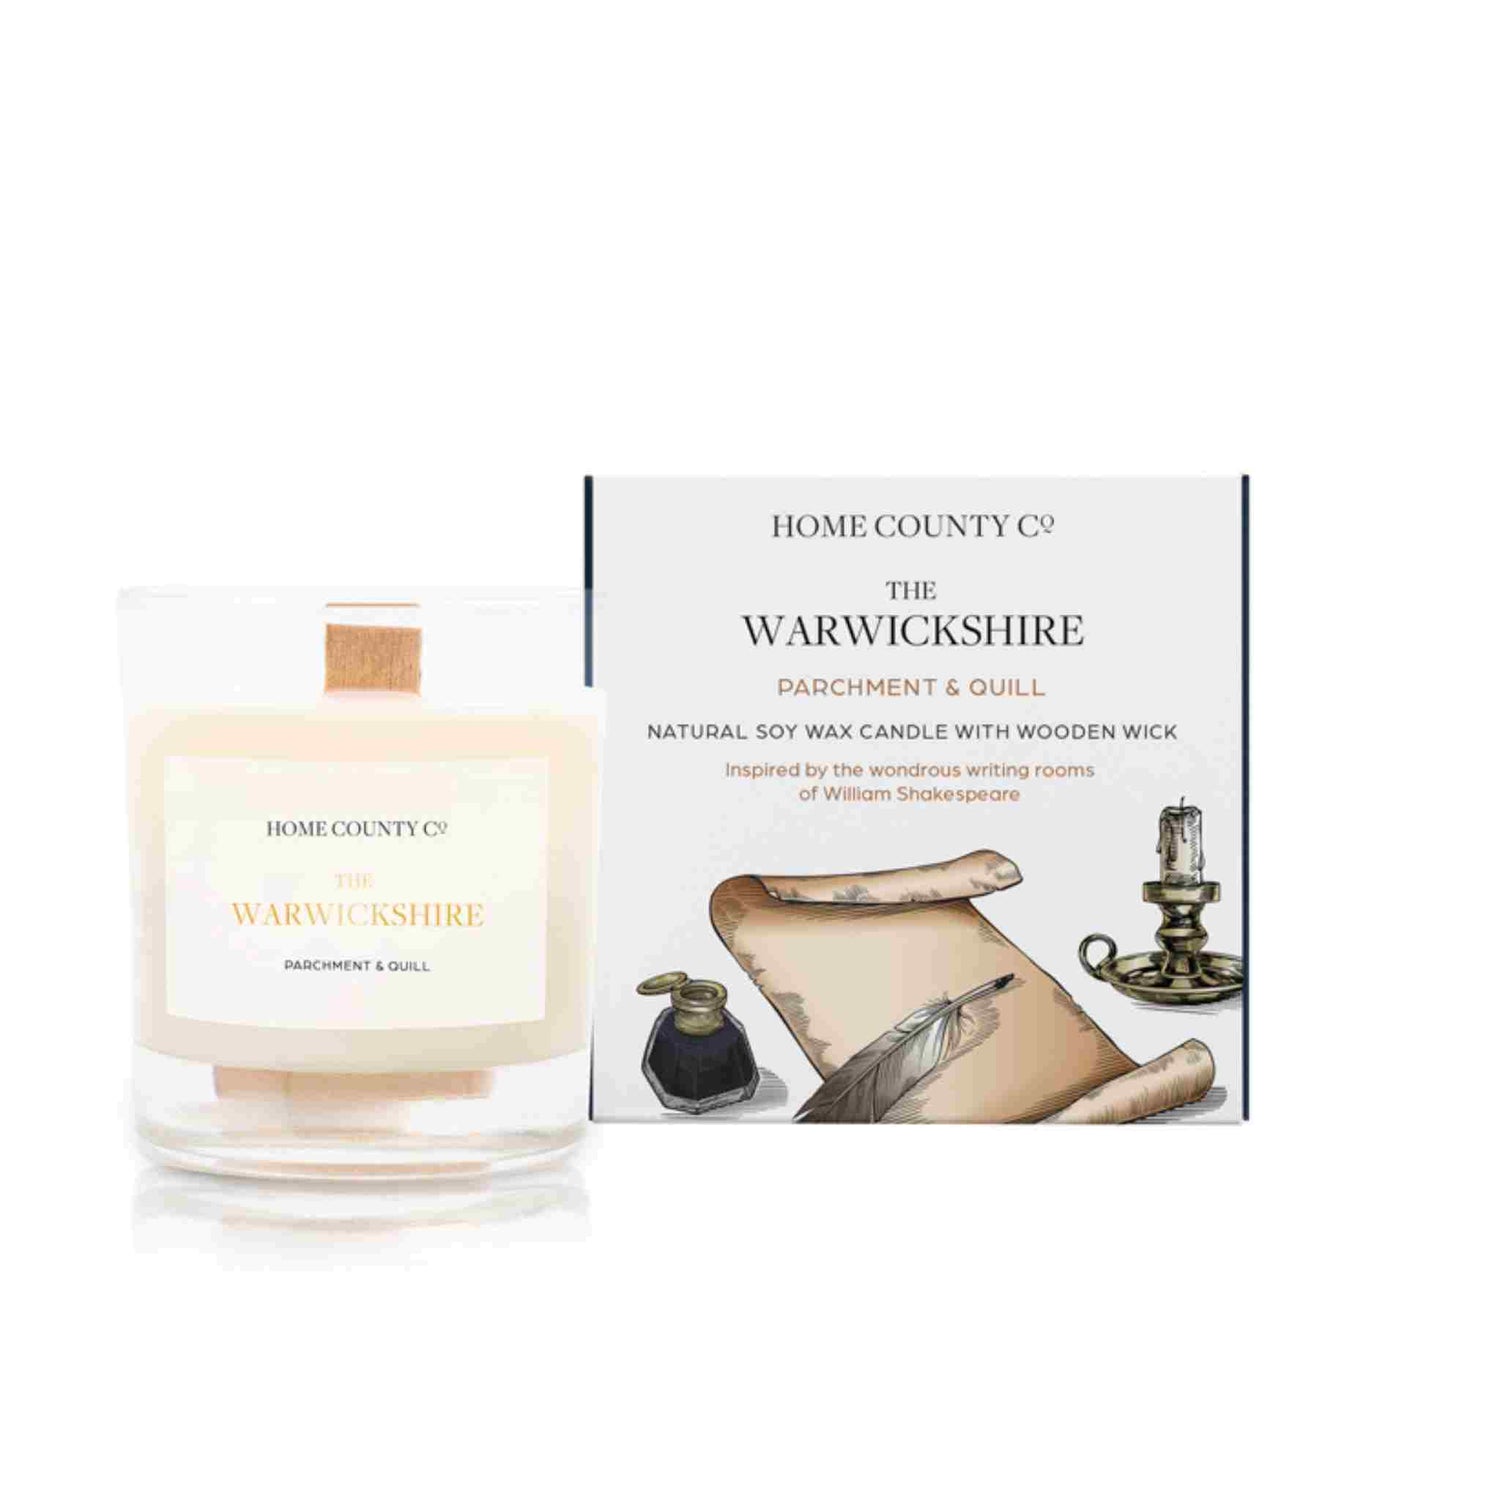 A parchment and quill scented candle from Home County Co. The wooden wick soy candle is shown next to the eco friendly box packaging.